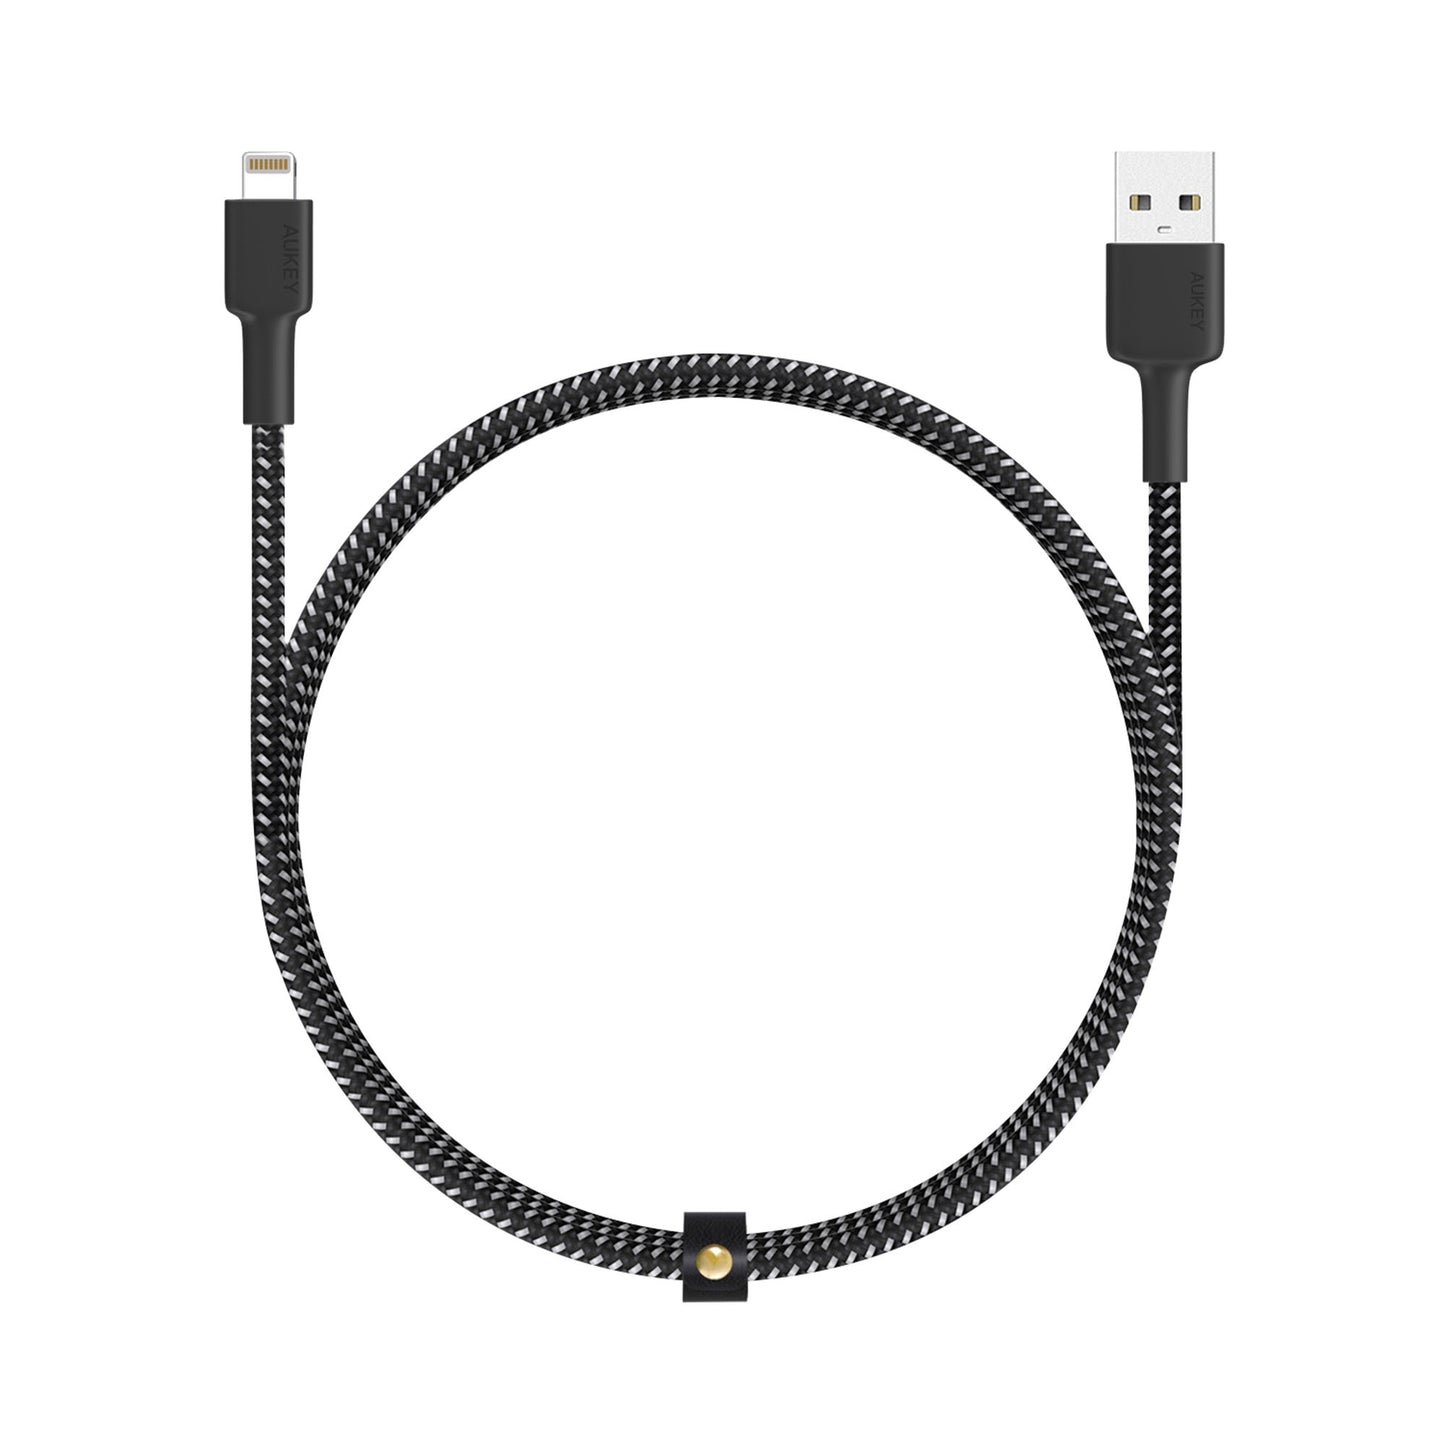 AUKEY MFI Certified Braided Lightning Cable 2m - Black